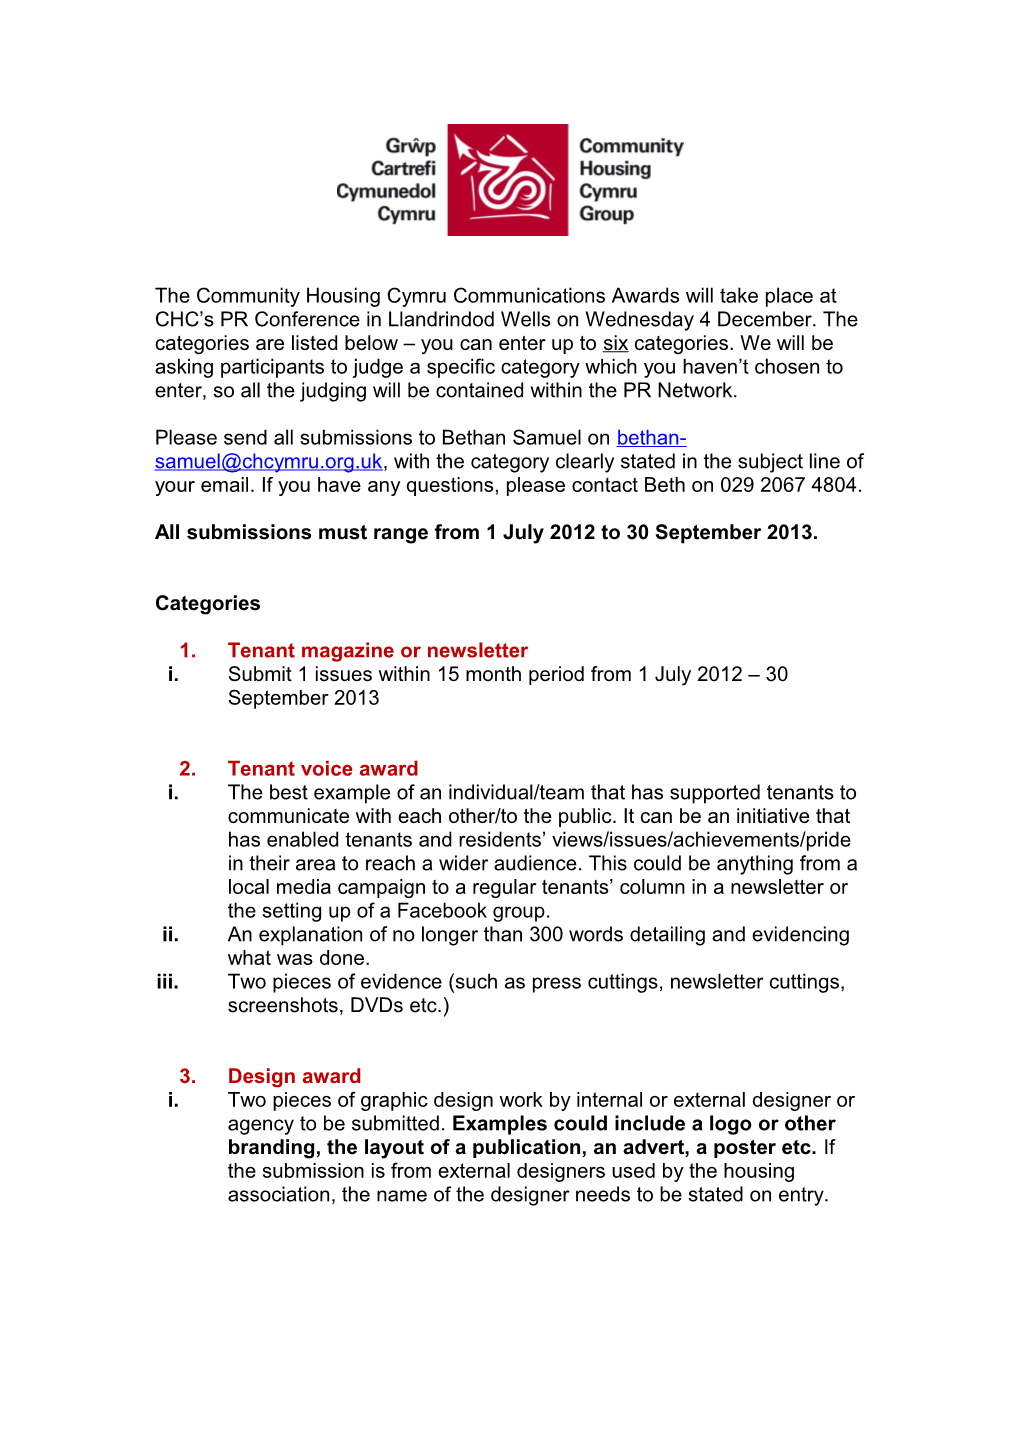 All Submissions Must Range from 1 July 2012 to 30 September 2013